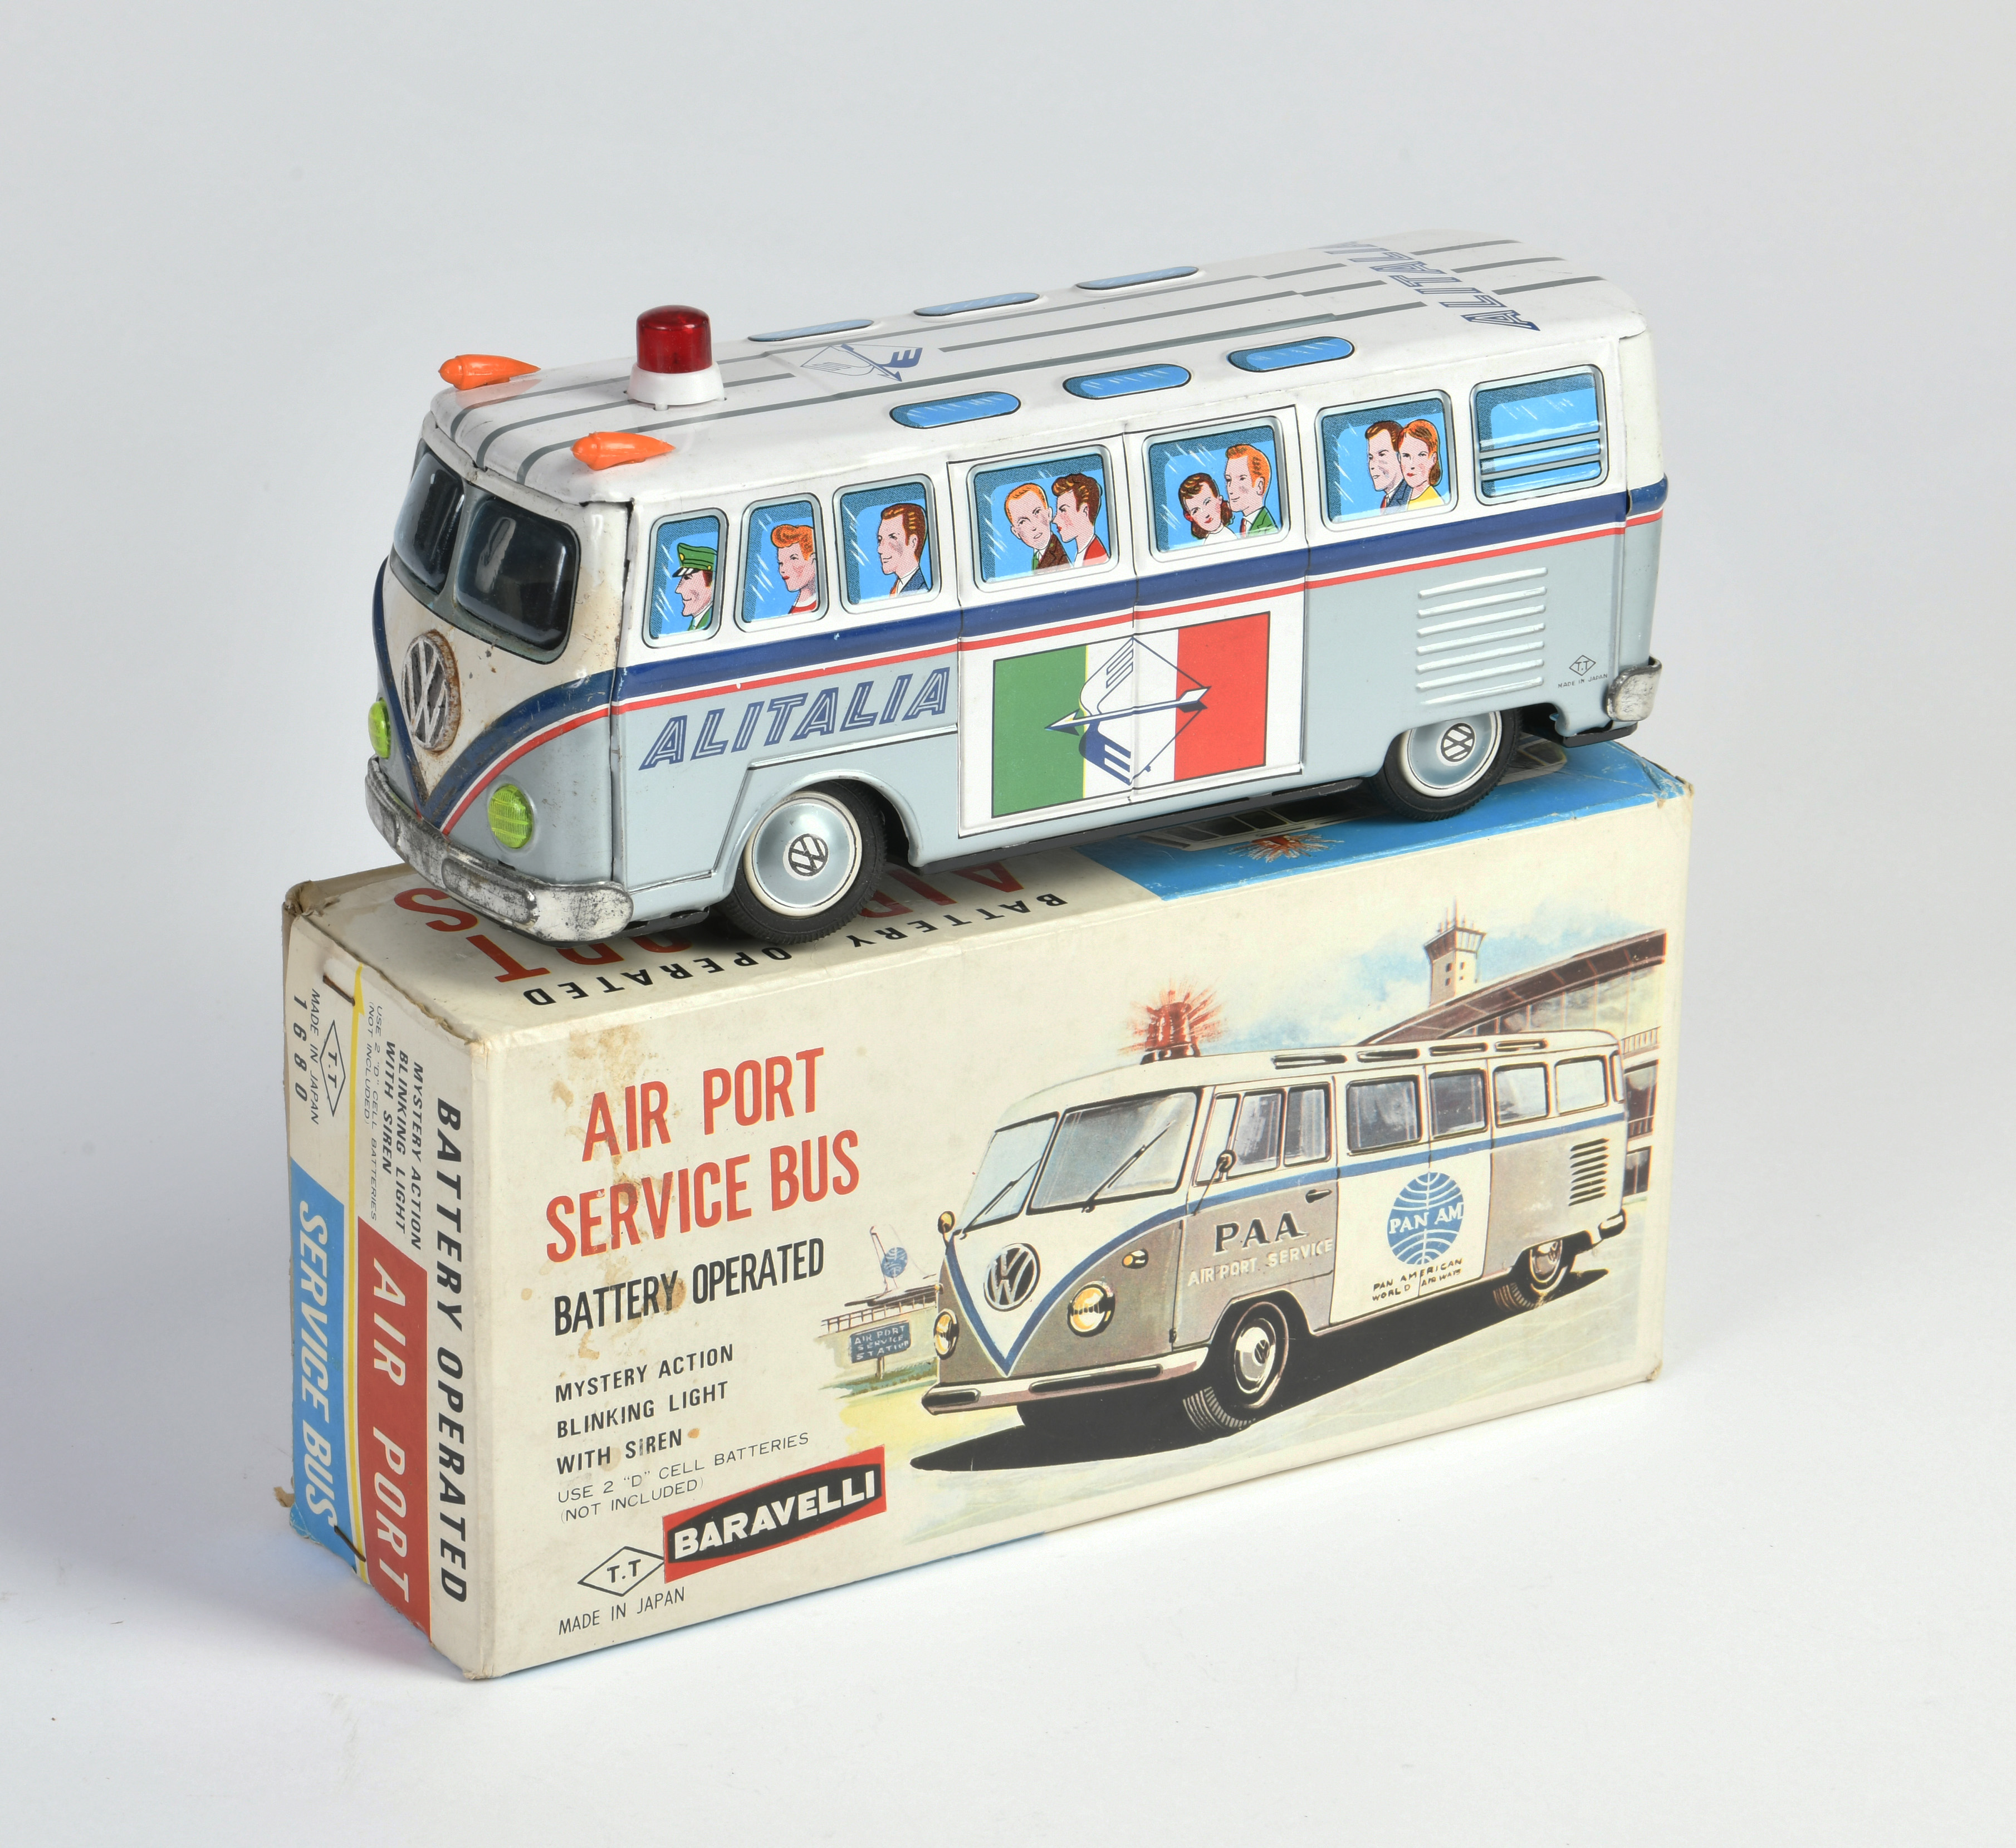 TT, VW Bus "ALITALIA", Japan, 24 cm, tin, paint d. in the front, box C 2, otherwise good